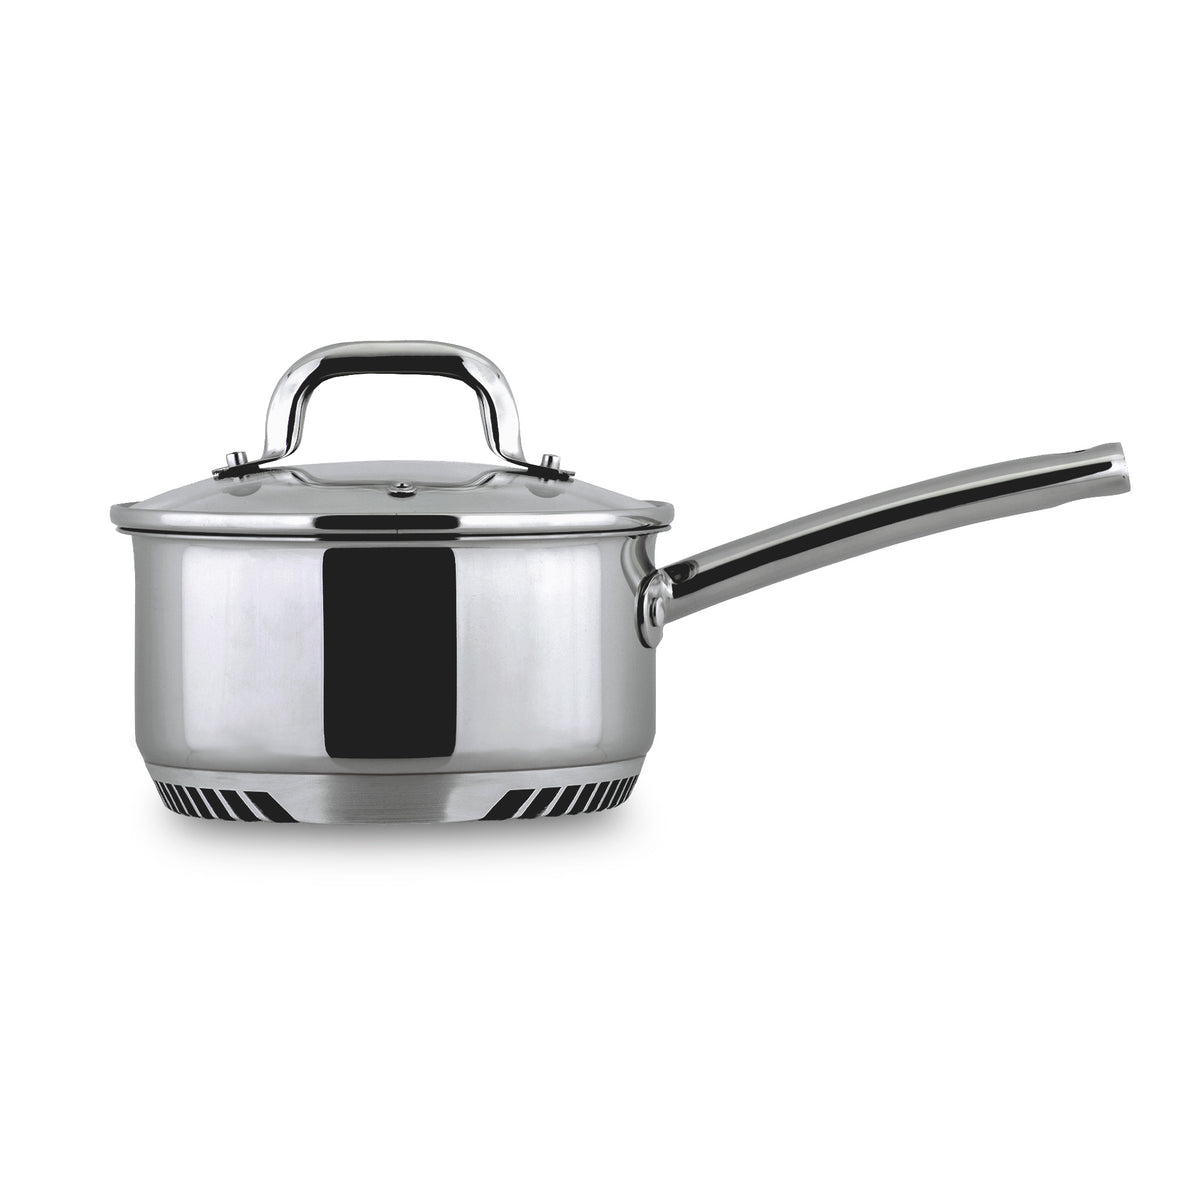 FRESHAIR™ RAPID BOIL 8 QT. STAINLESS STEEL MULTI-POT/STEAMER,  TIME-AND-ENERGY SAVING COOKWARE FOR GAS STOVE